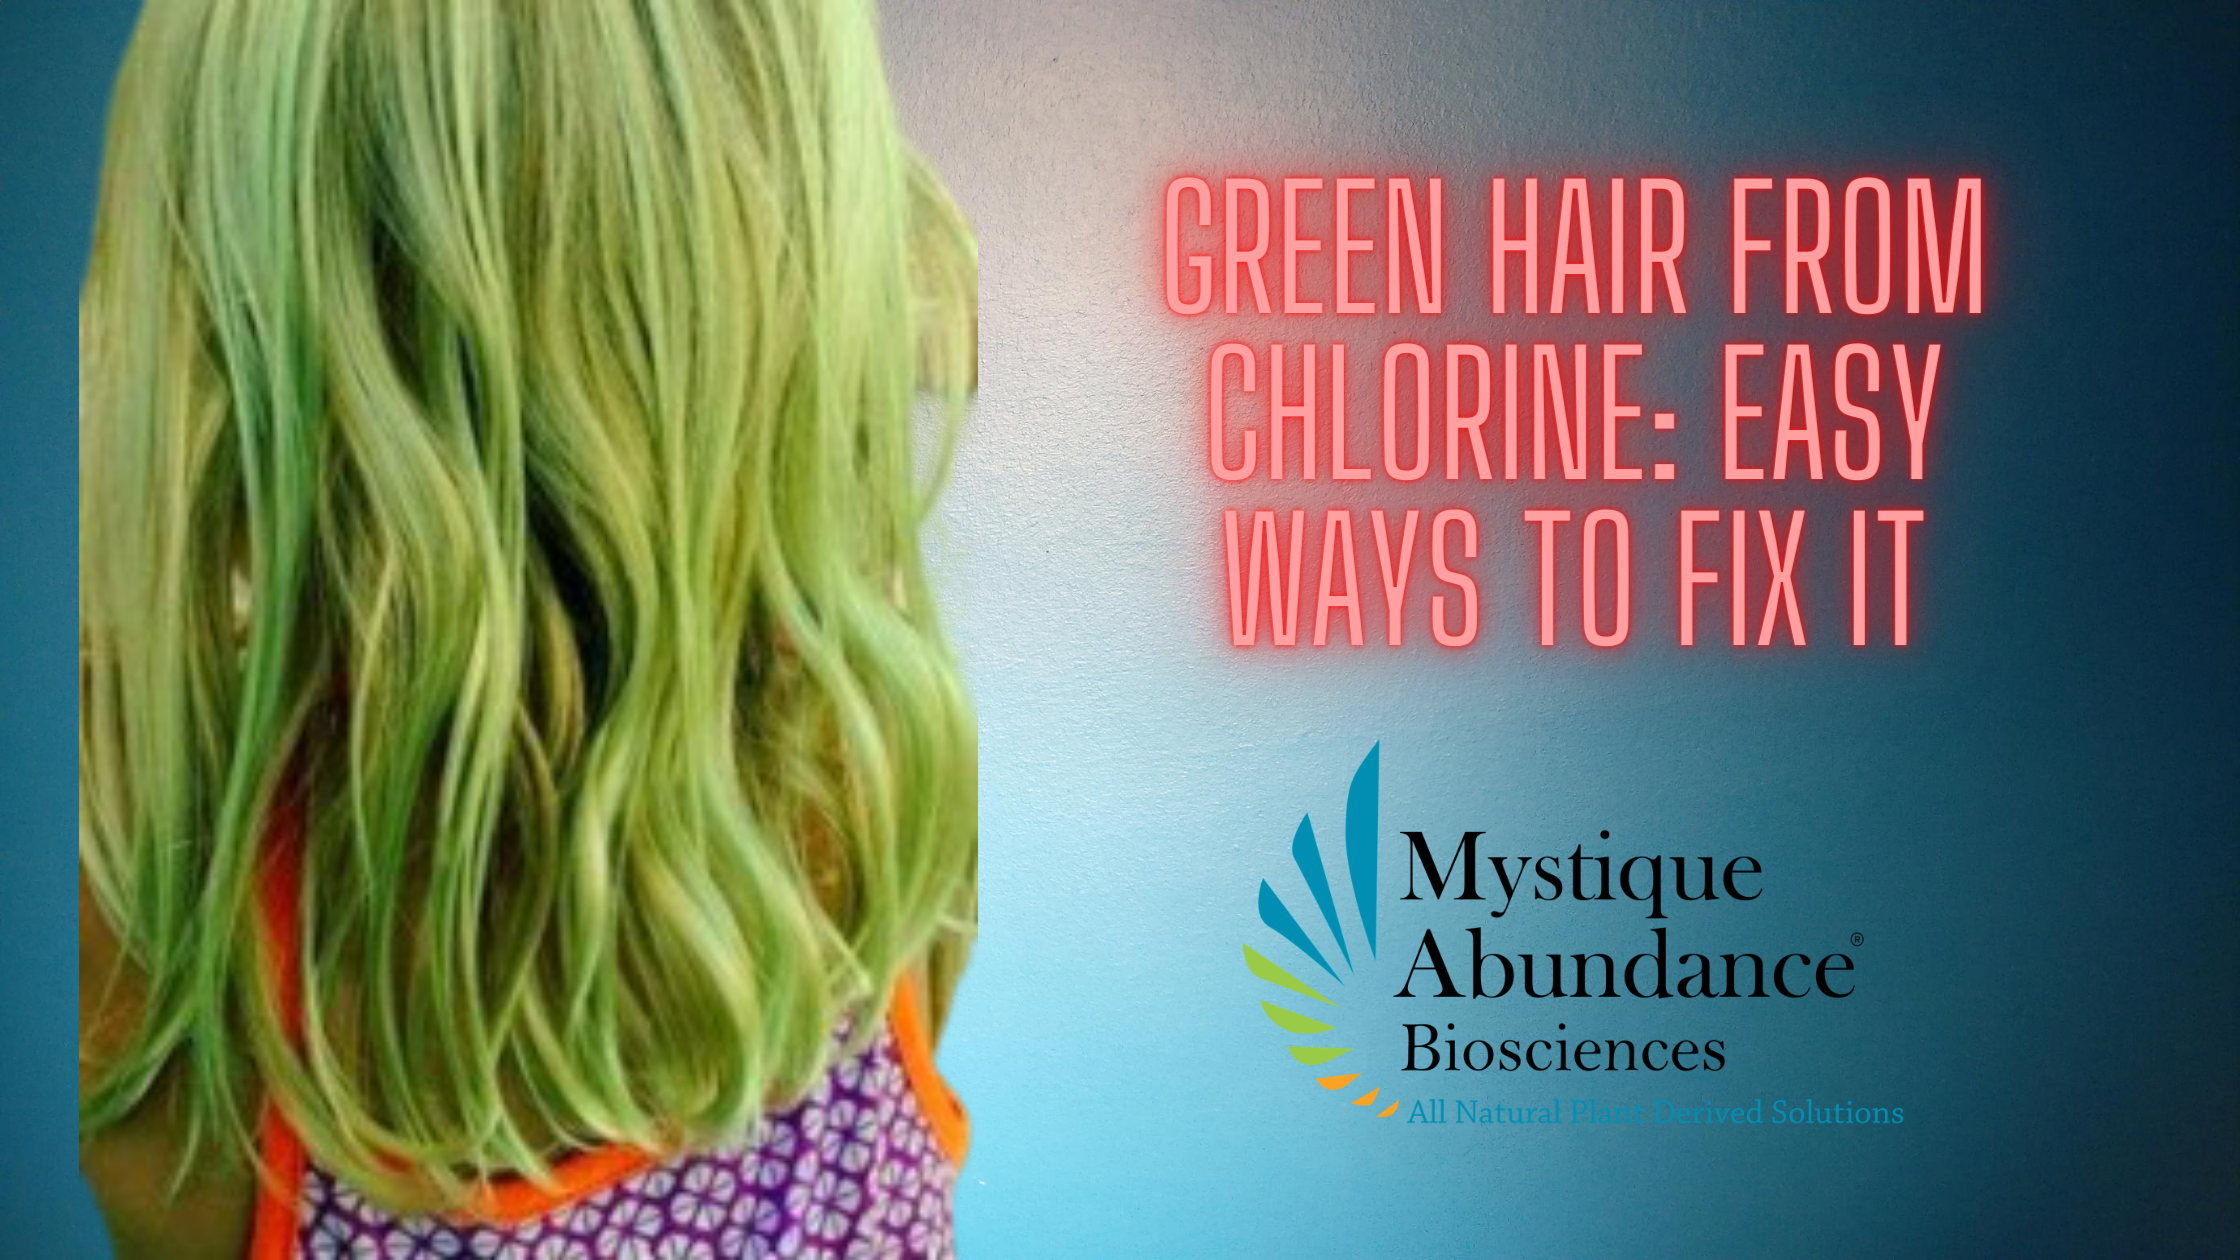 6. Common Mistakes That Cause Blue Hair Dye to Turn Green - wide 2